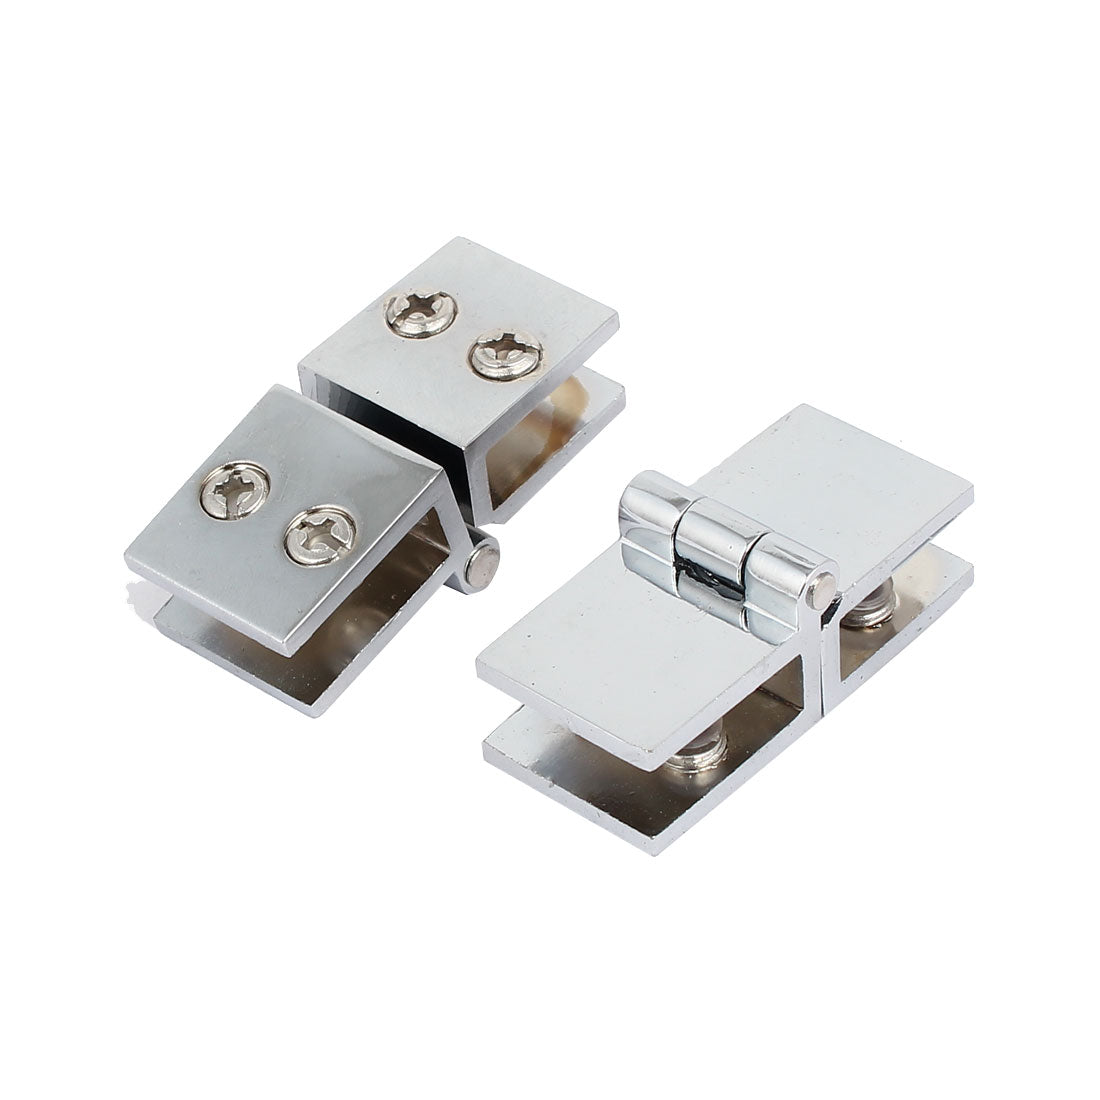 uxcell Uxcell Zinc Alloy 180 Degree Glass to Glass Door Hinge Glass Clamp Clips Holders 2pcs